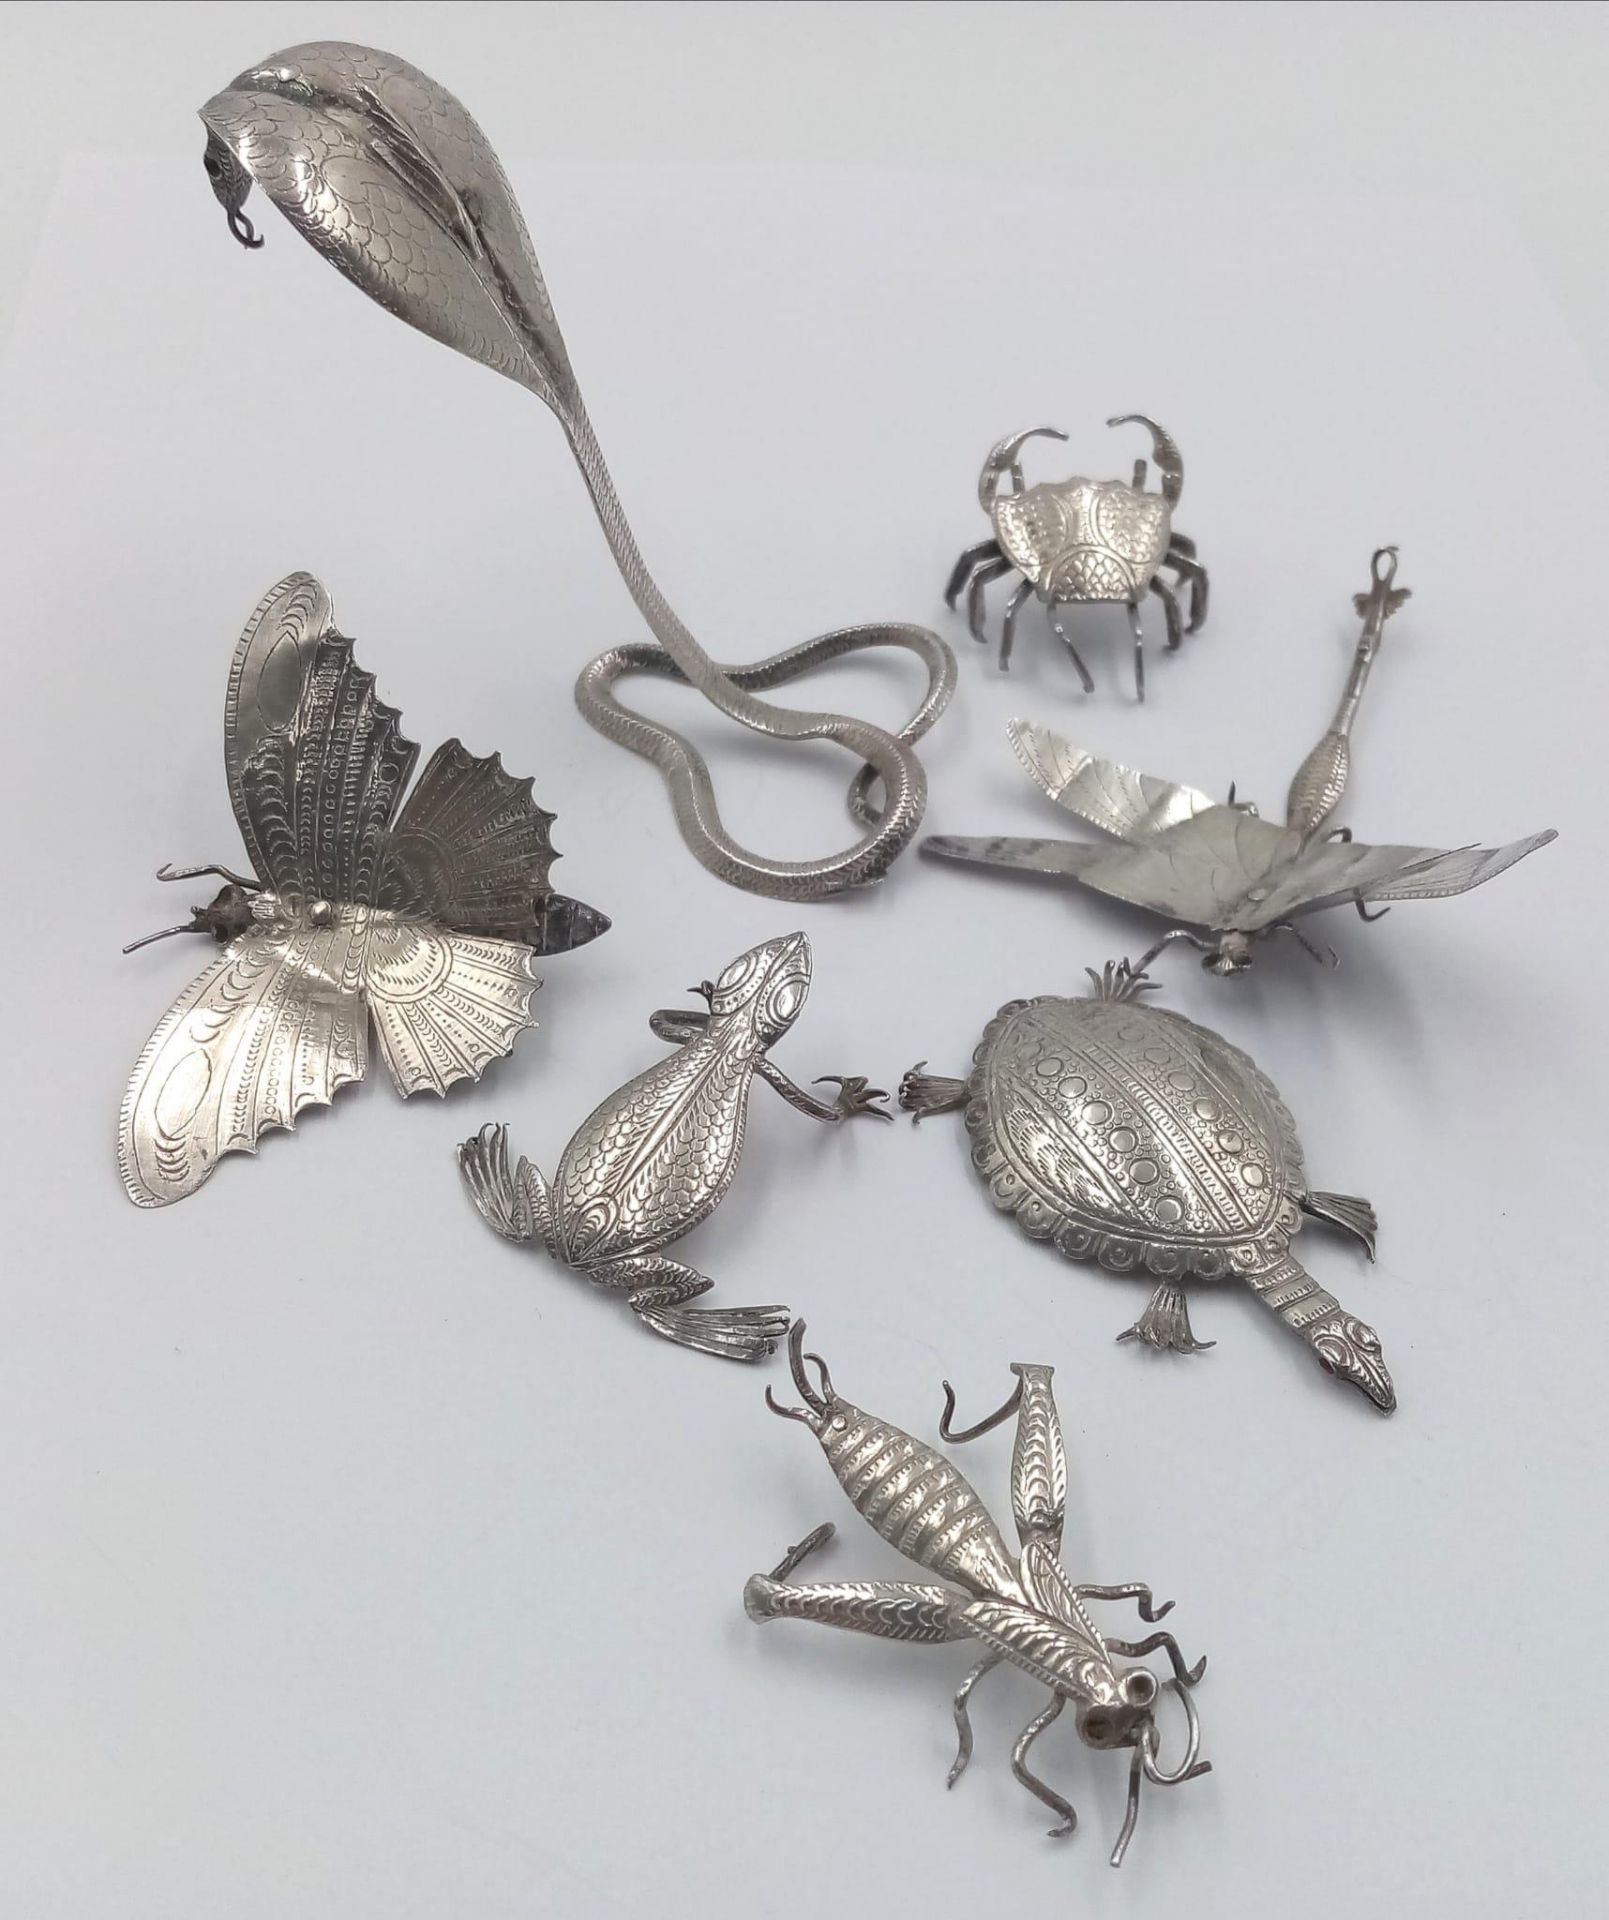 An interesting collection of hand crafted white metal animals and insects such as crab, snake,